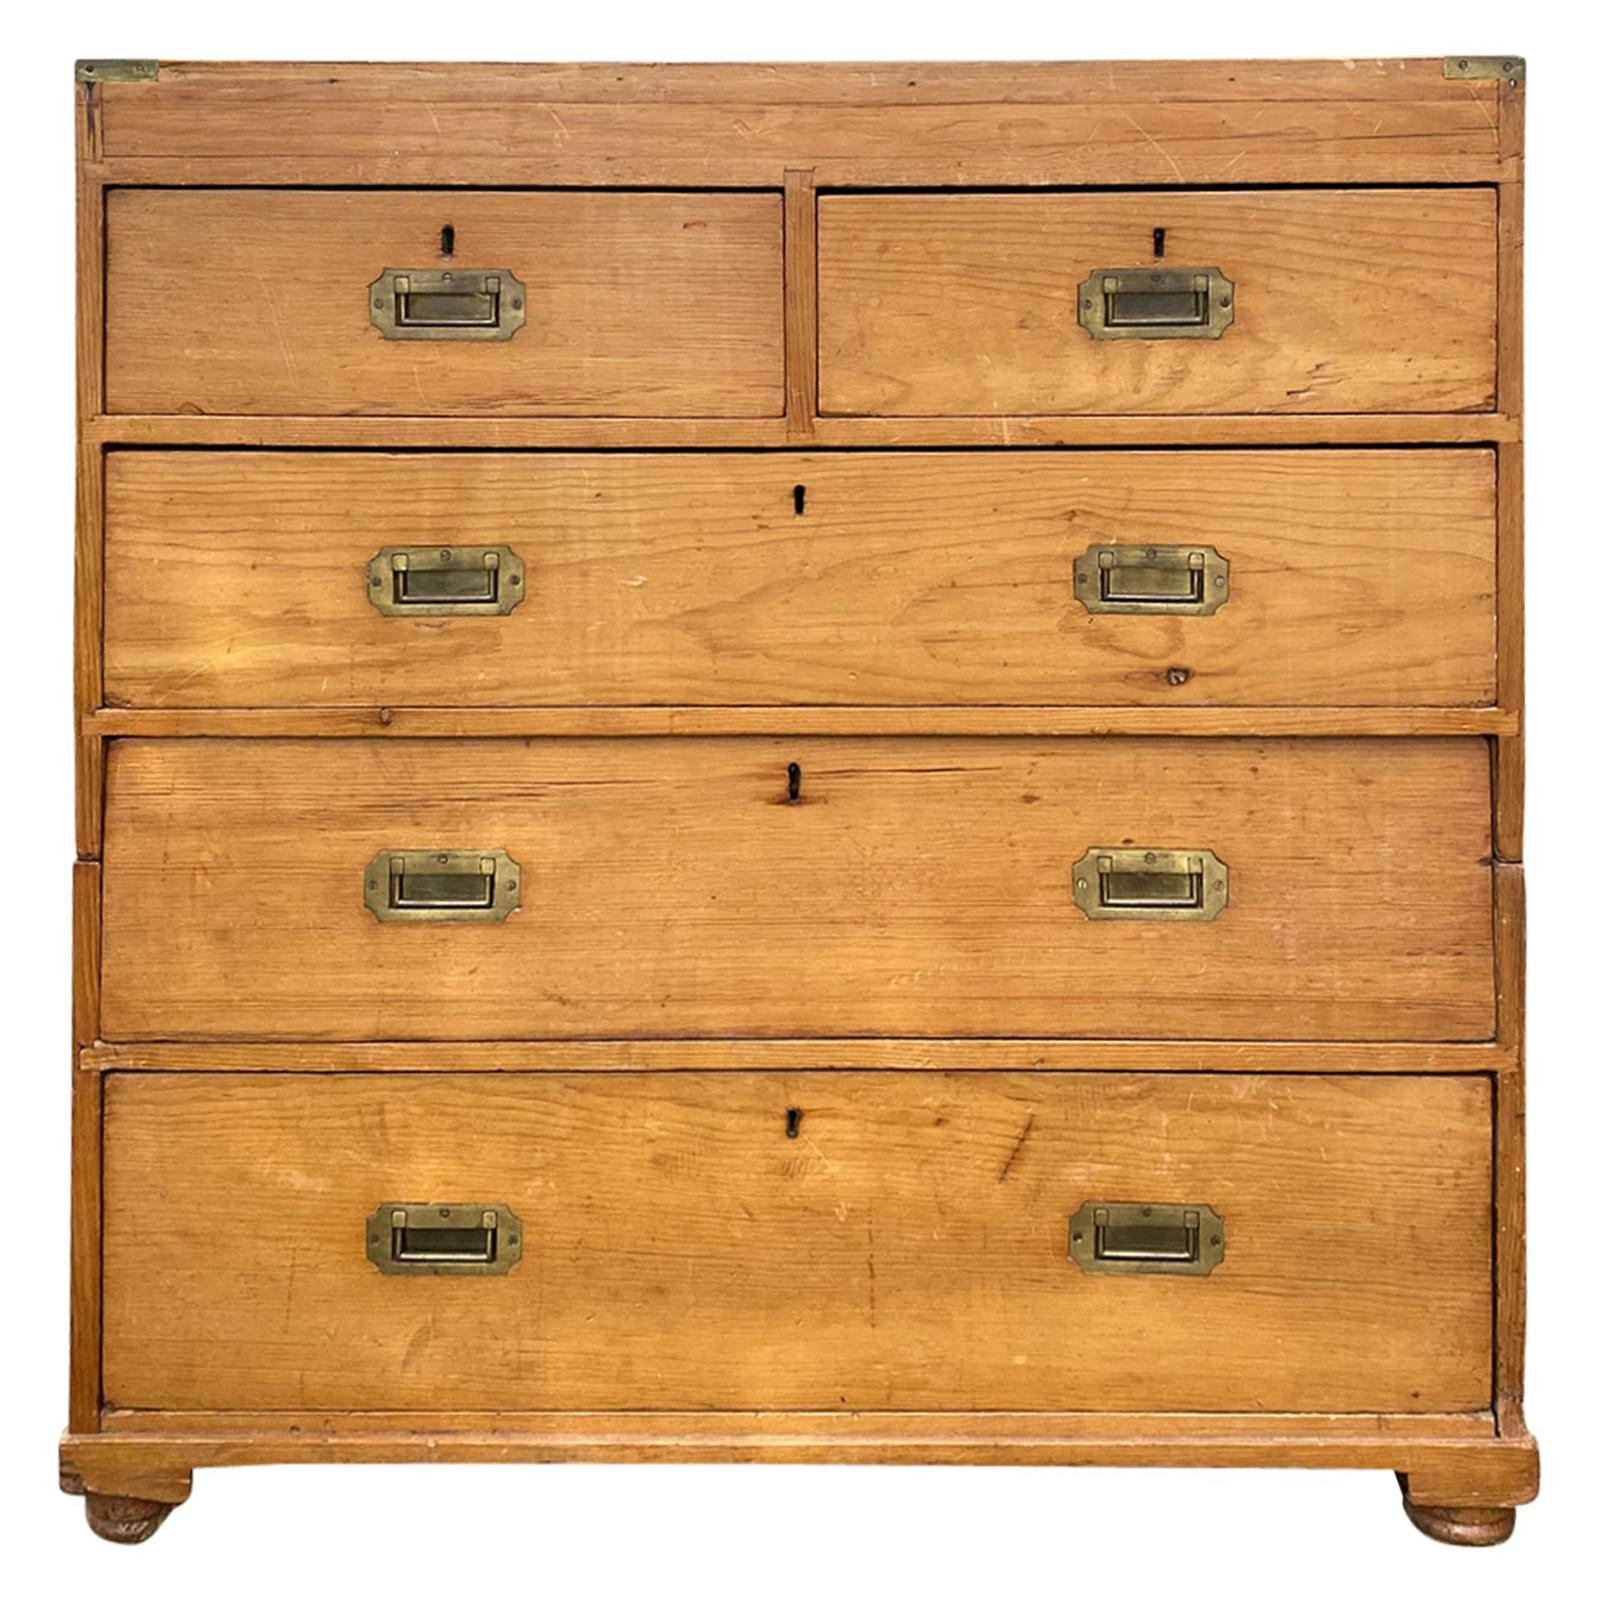 Circa 1880s-1890s English Pine Campaign Chest of Drawers For Sale